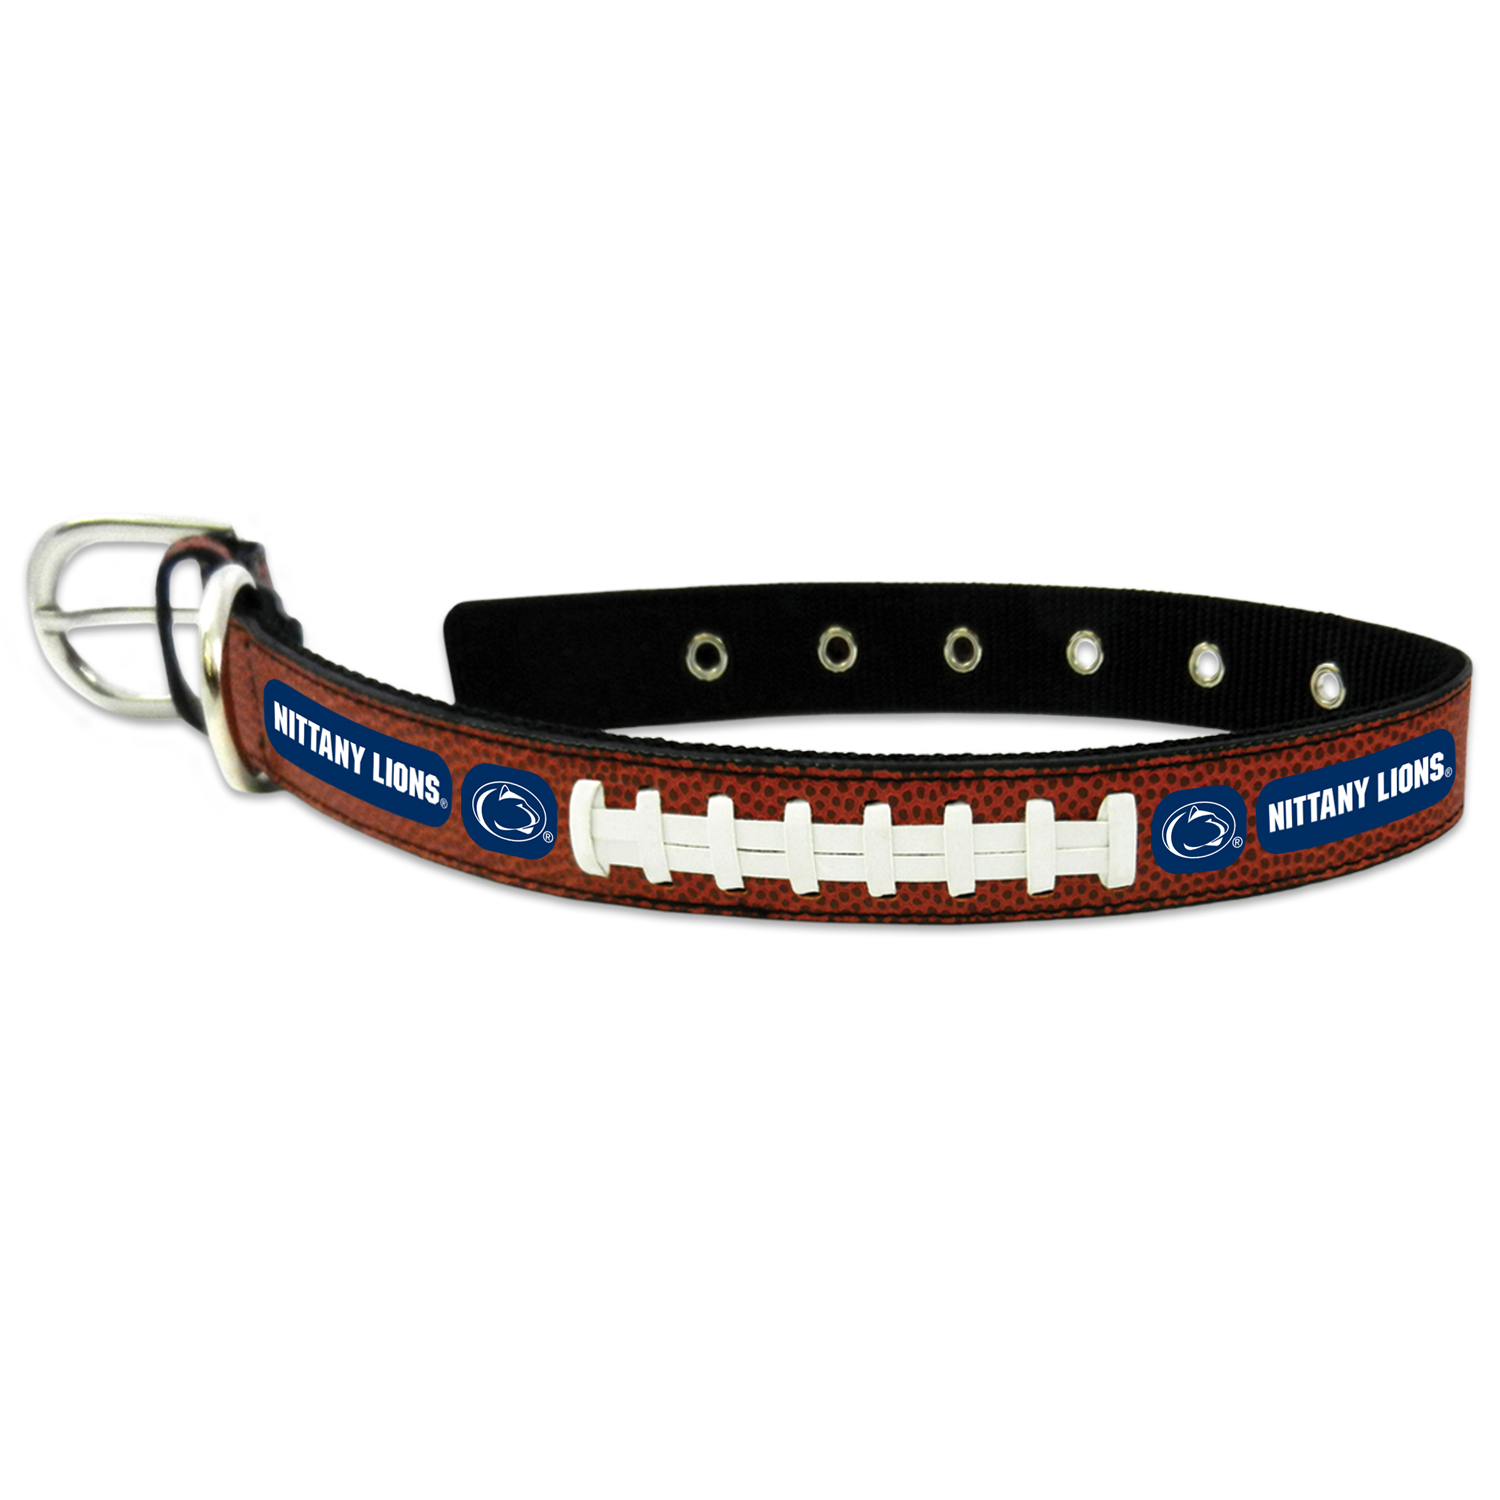 GAMEWEAR Penn State Nittany Lions Classic Leather Football Collar